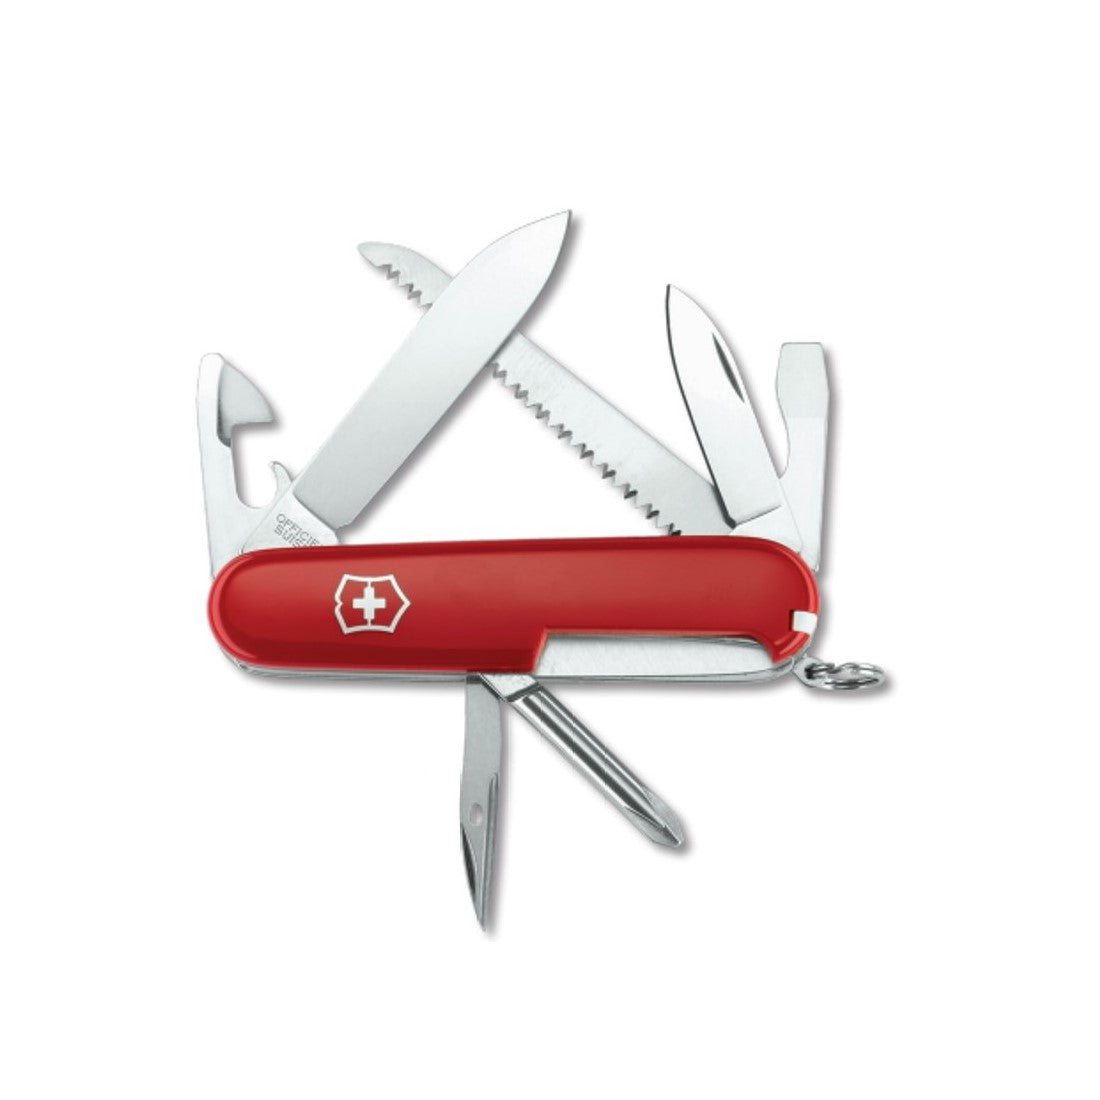 AFT Swiss Army Hiker Knife - Red